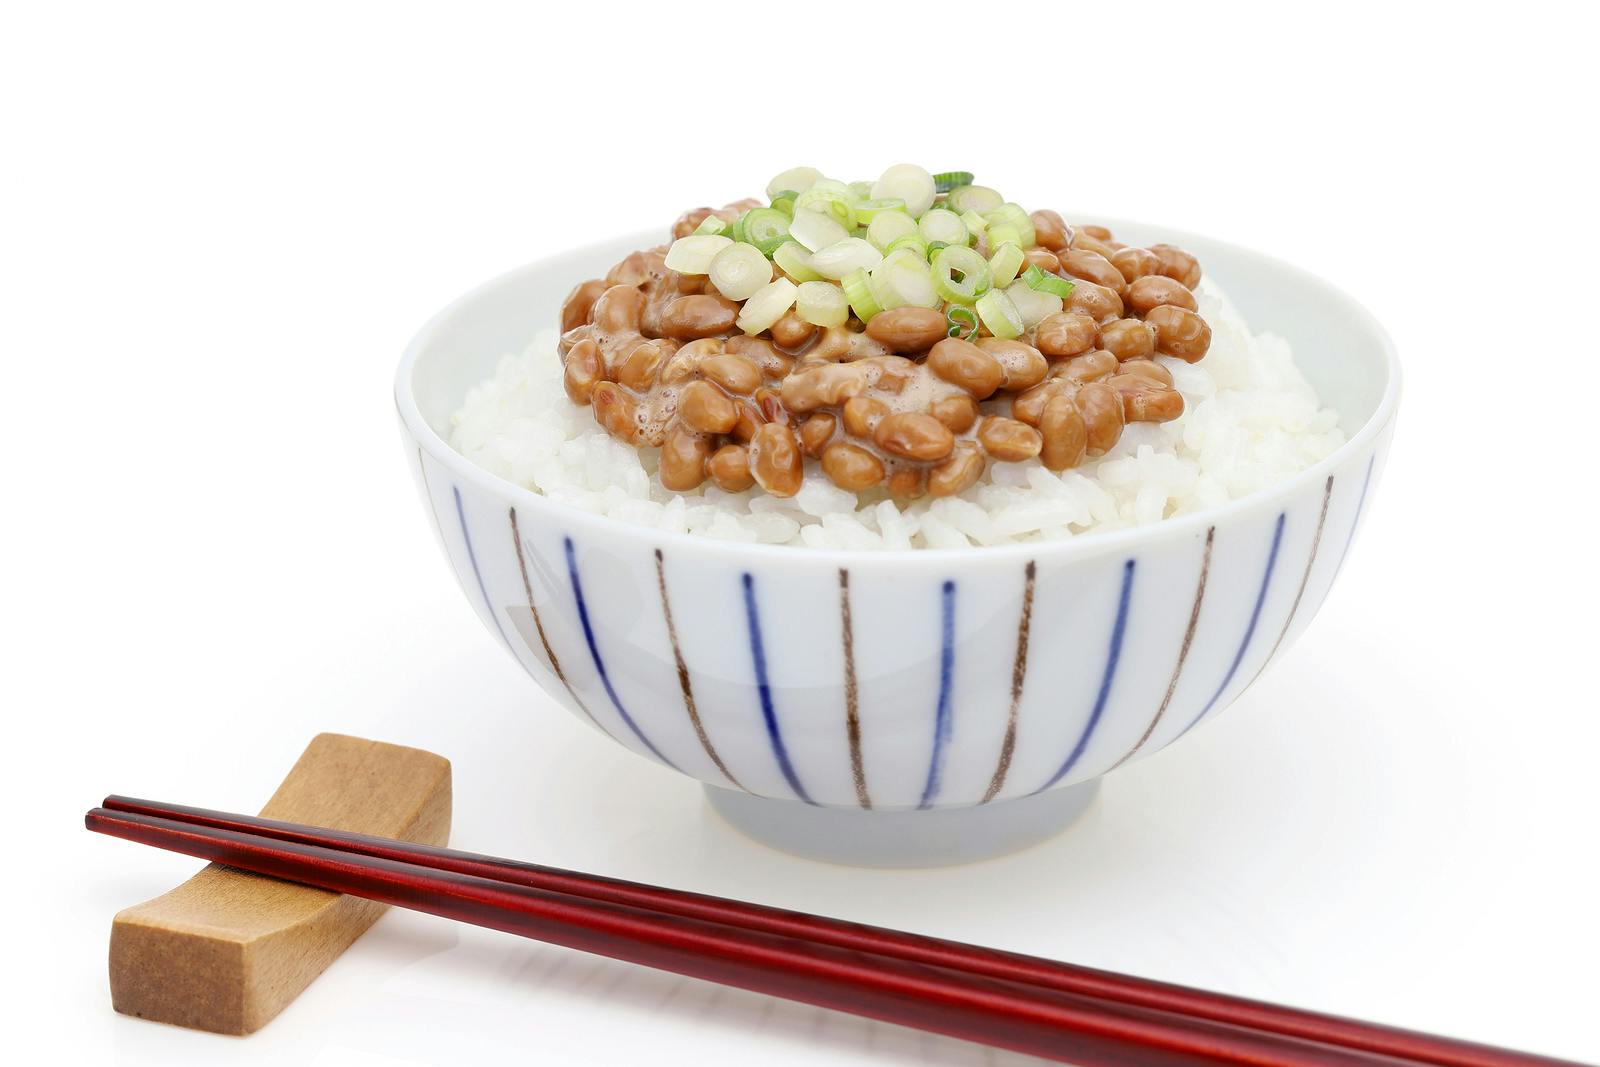 a bowl with rice and natto, fermented beans linked to longer life in Japan